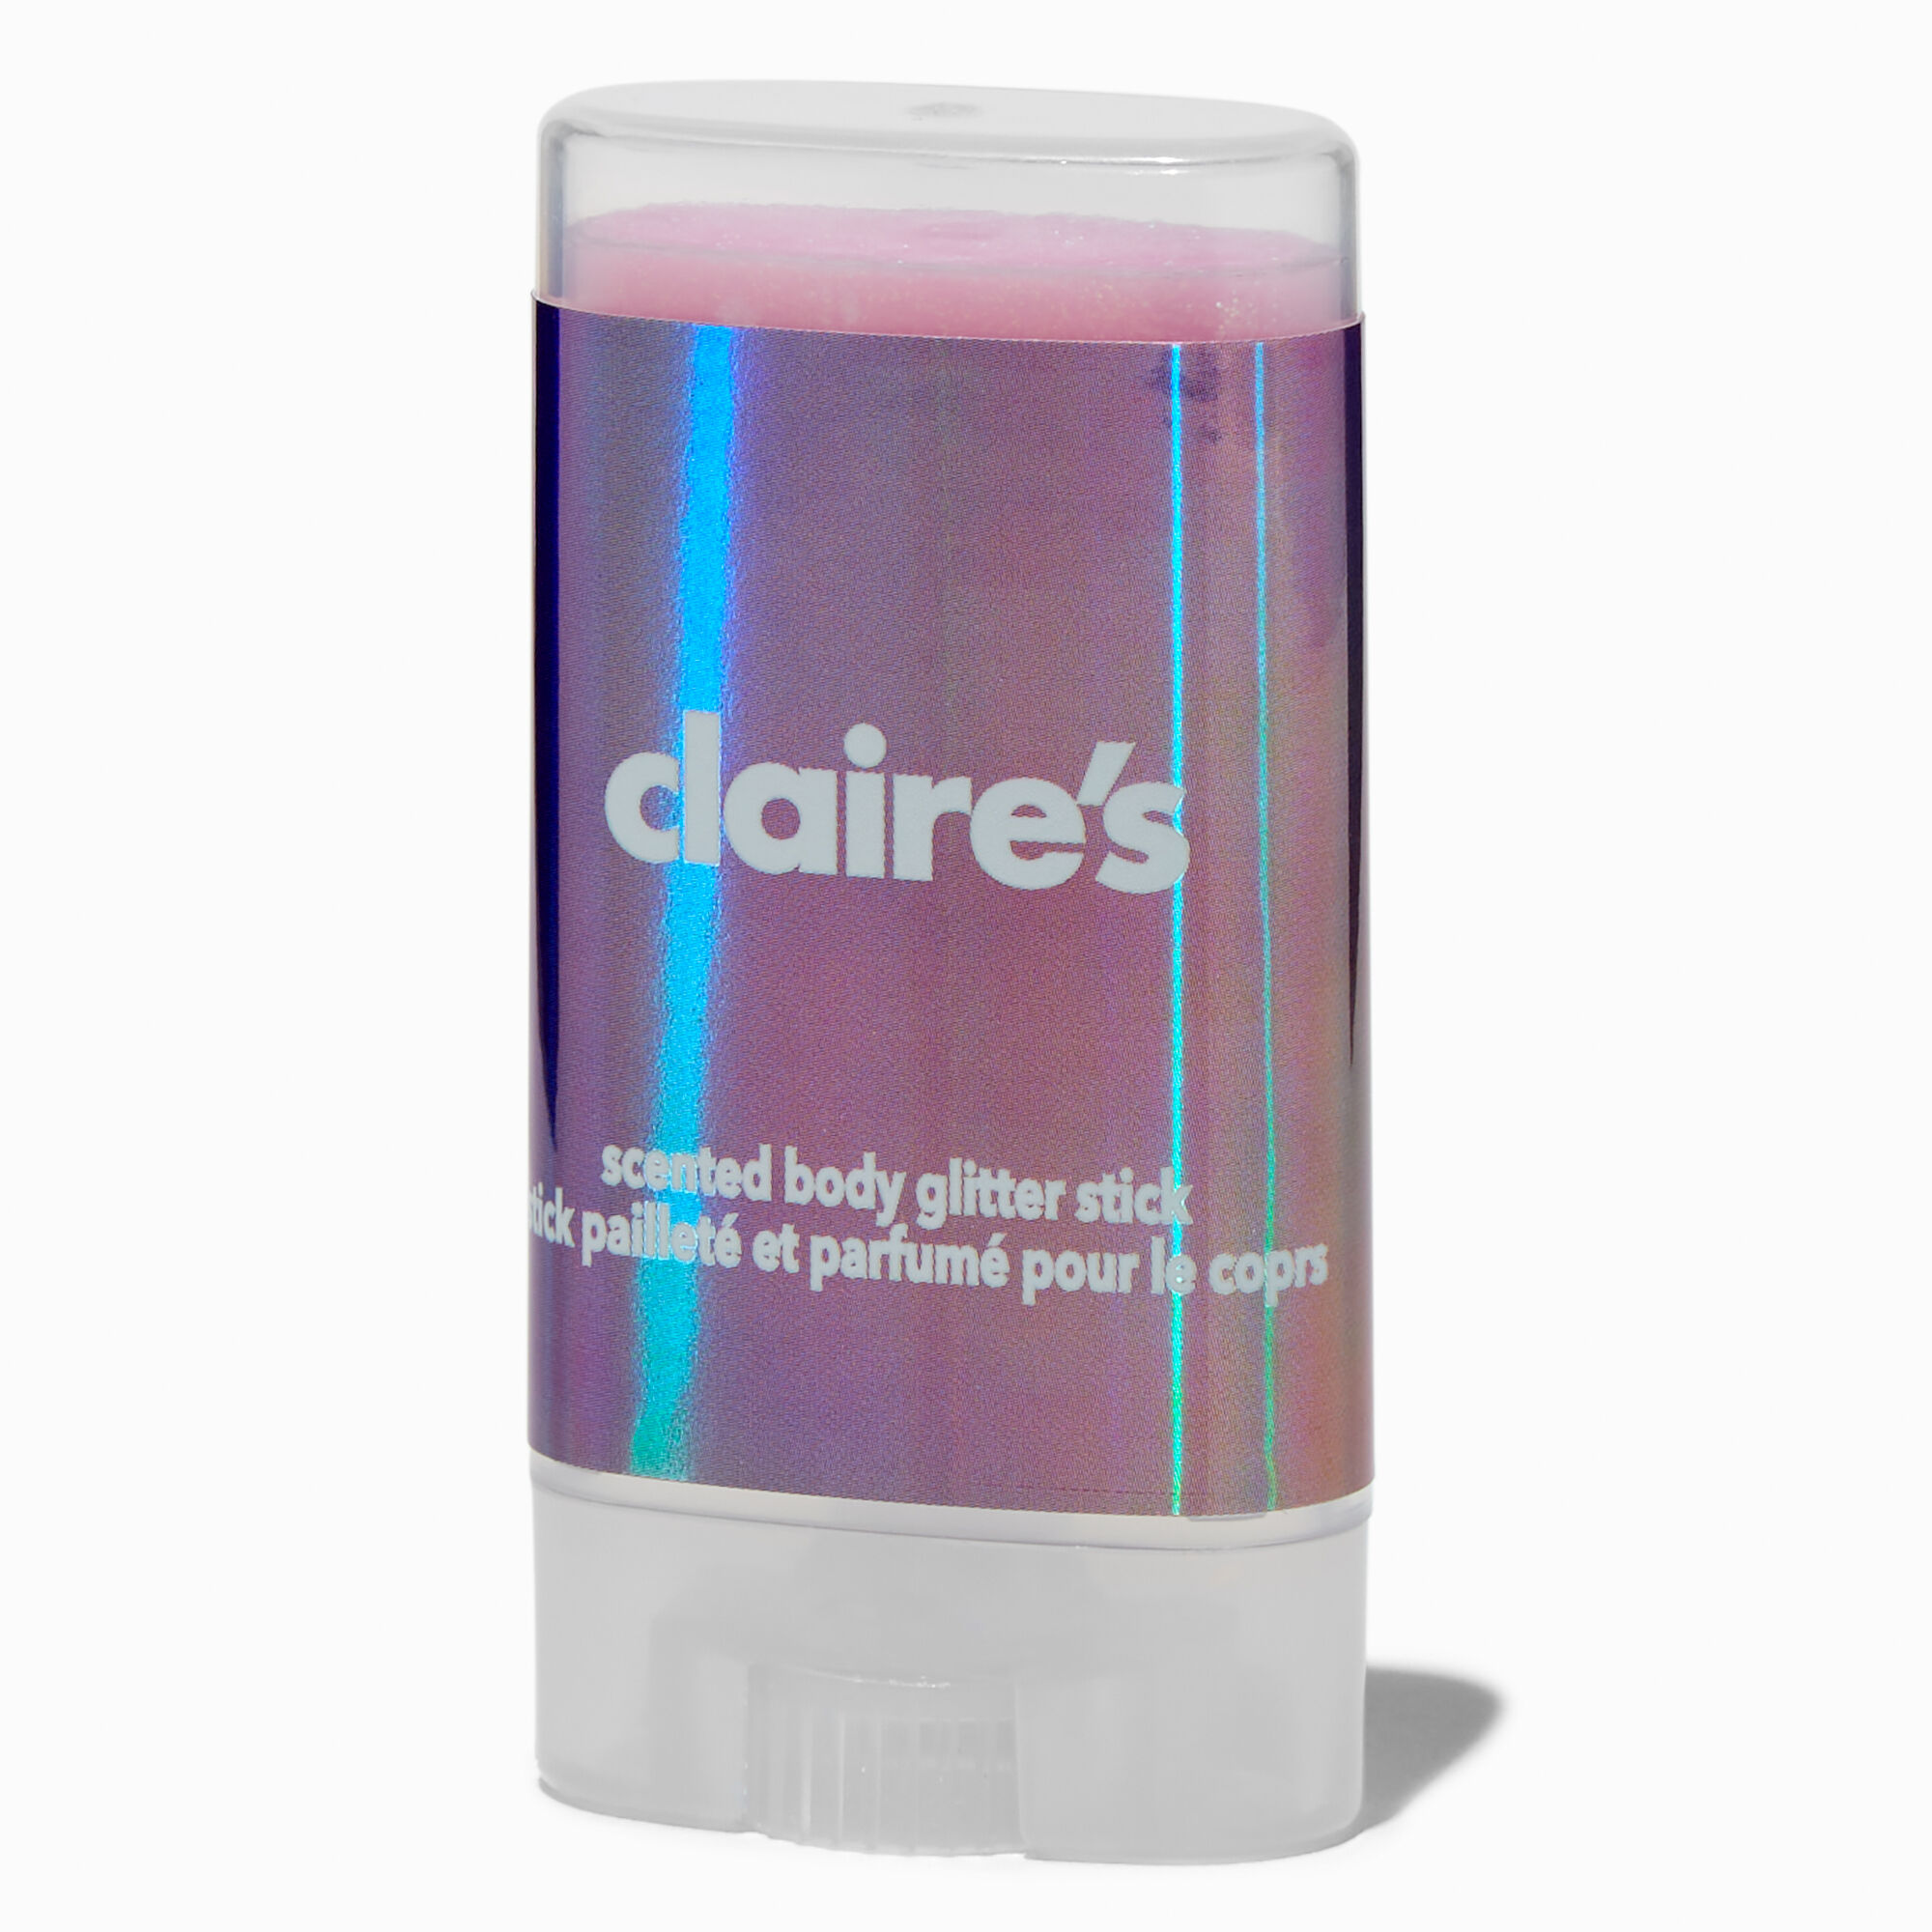 View Claires Scented Body Glitter Stick Pink information